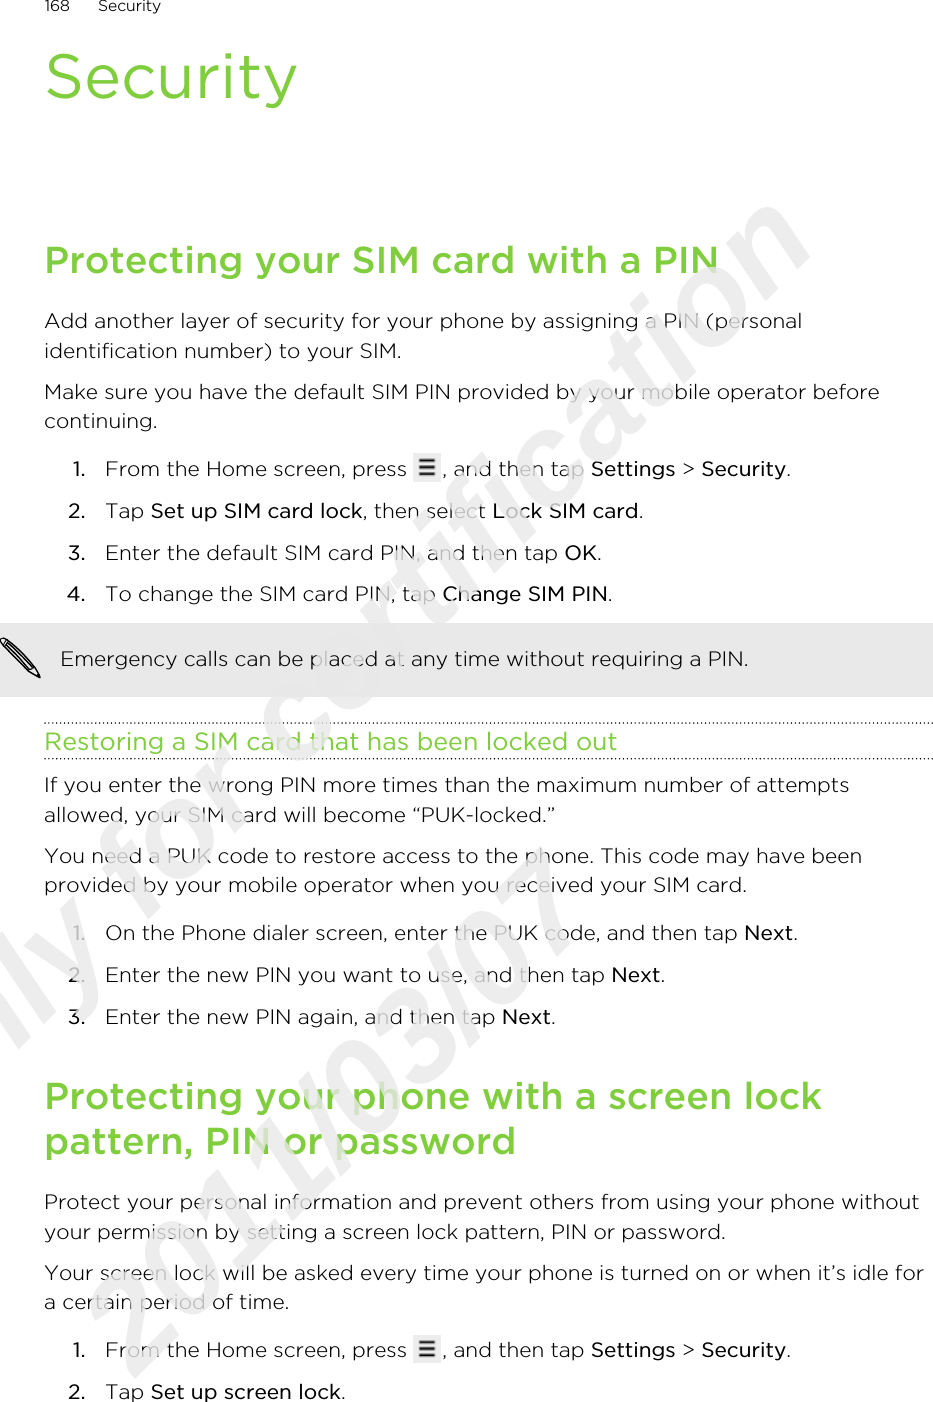 SecurityProtecting your SIM card with a PINAdd another layer of security for your phone by assigning a PIN (personalidentification number) to your SIM.Make sure you have the default SIM PIN provided by your mobile operator beforecontinuing.1. From the Home screen, press  , and then tap Settings &gt; Security.2. Tap Set up SIM card lock, then select Lock SIM card.3. Enter the default SIM card PIN, and then tap OK.4. To change the SIM card PIN, tap Change SIM PIN. Emergency calls can be placed at any time without requiring a PIN.Restoring a SIM card that has been locked outIf you enter the wrong PIN more times than the maximum number of attemptsallowed, your SIM card will become “PUK-locked.”You need a PUK code to restore access to the phone. This code may have beenprovided by your mobile operator when you received your SIM card.1. On the Phone dialer screen, enter the PUK code, and then tap Next.2. Enter the new PIN you want to use, and then tap Next.3. Enter the new PIN again, and then tap Next.Protecting your phone with a screen lockpattern, PIN or passwordProtect your personal information and prevent others from using your phone withoutyour permission by setting a screen lock pattern, PIN or password.Your screen lock will be asked every time your phone is turned on or when it’s idle fora certain period of time.1. From the Home screen, press  , and then tap Settings &gt; Security.2. Tap Set up screen lock.168 SecurityOnly for certification  2011/03/07